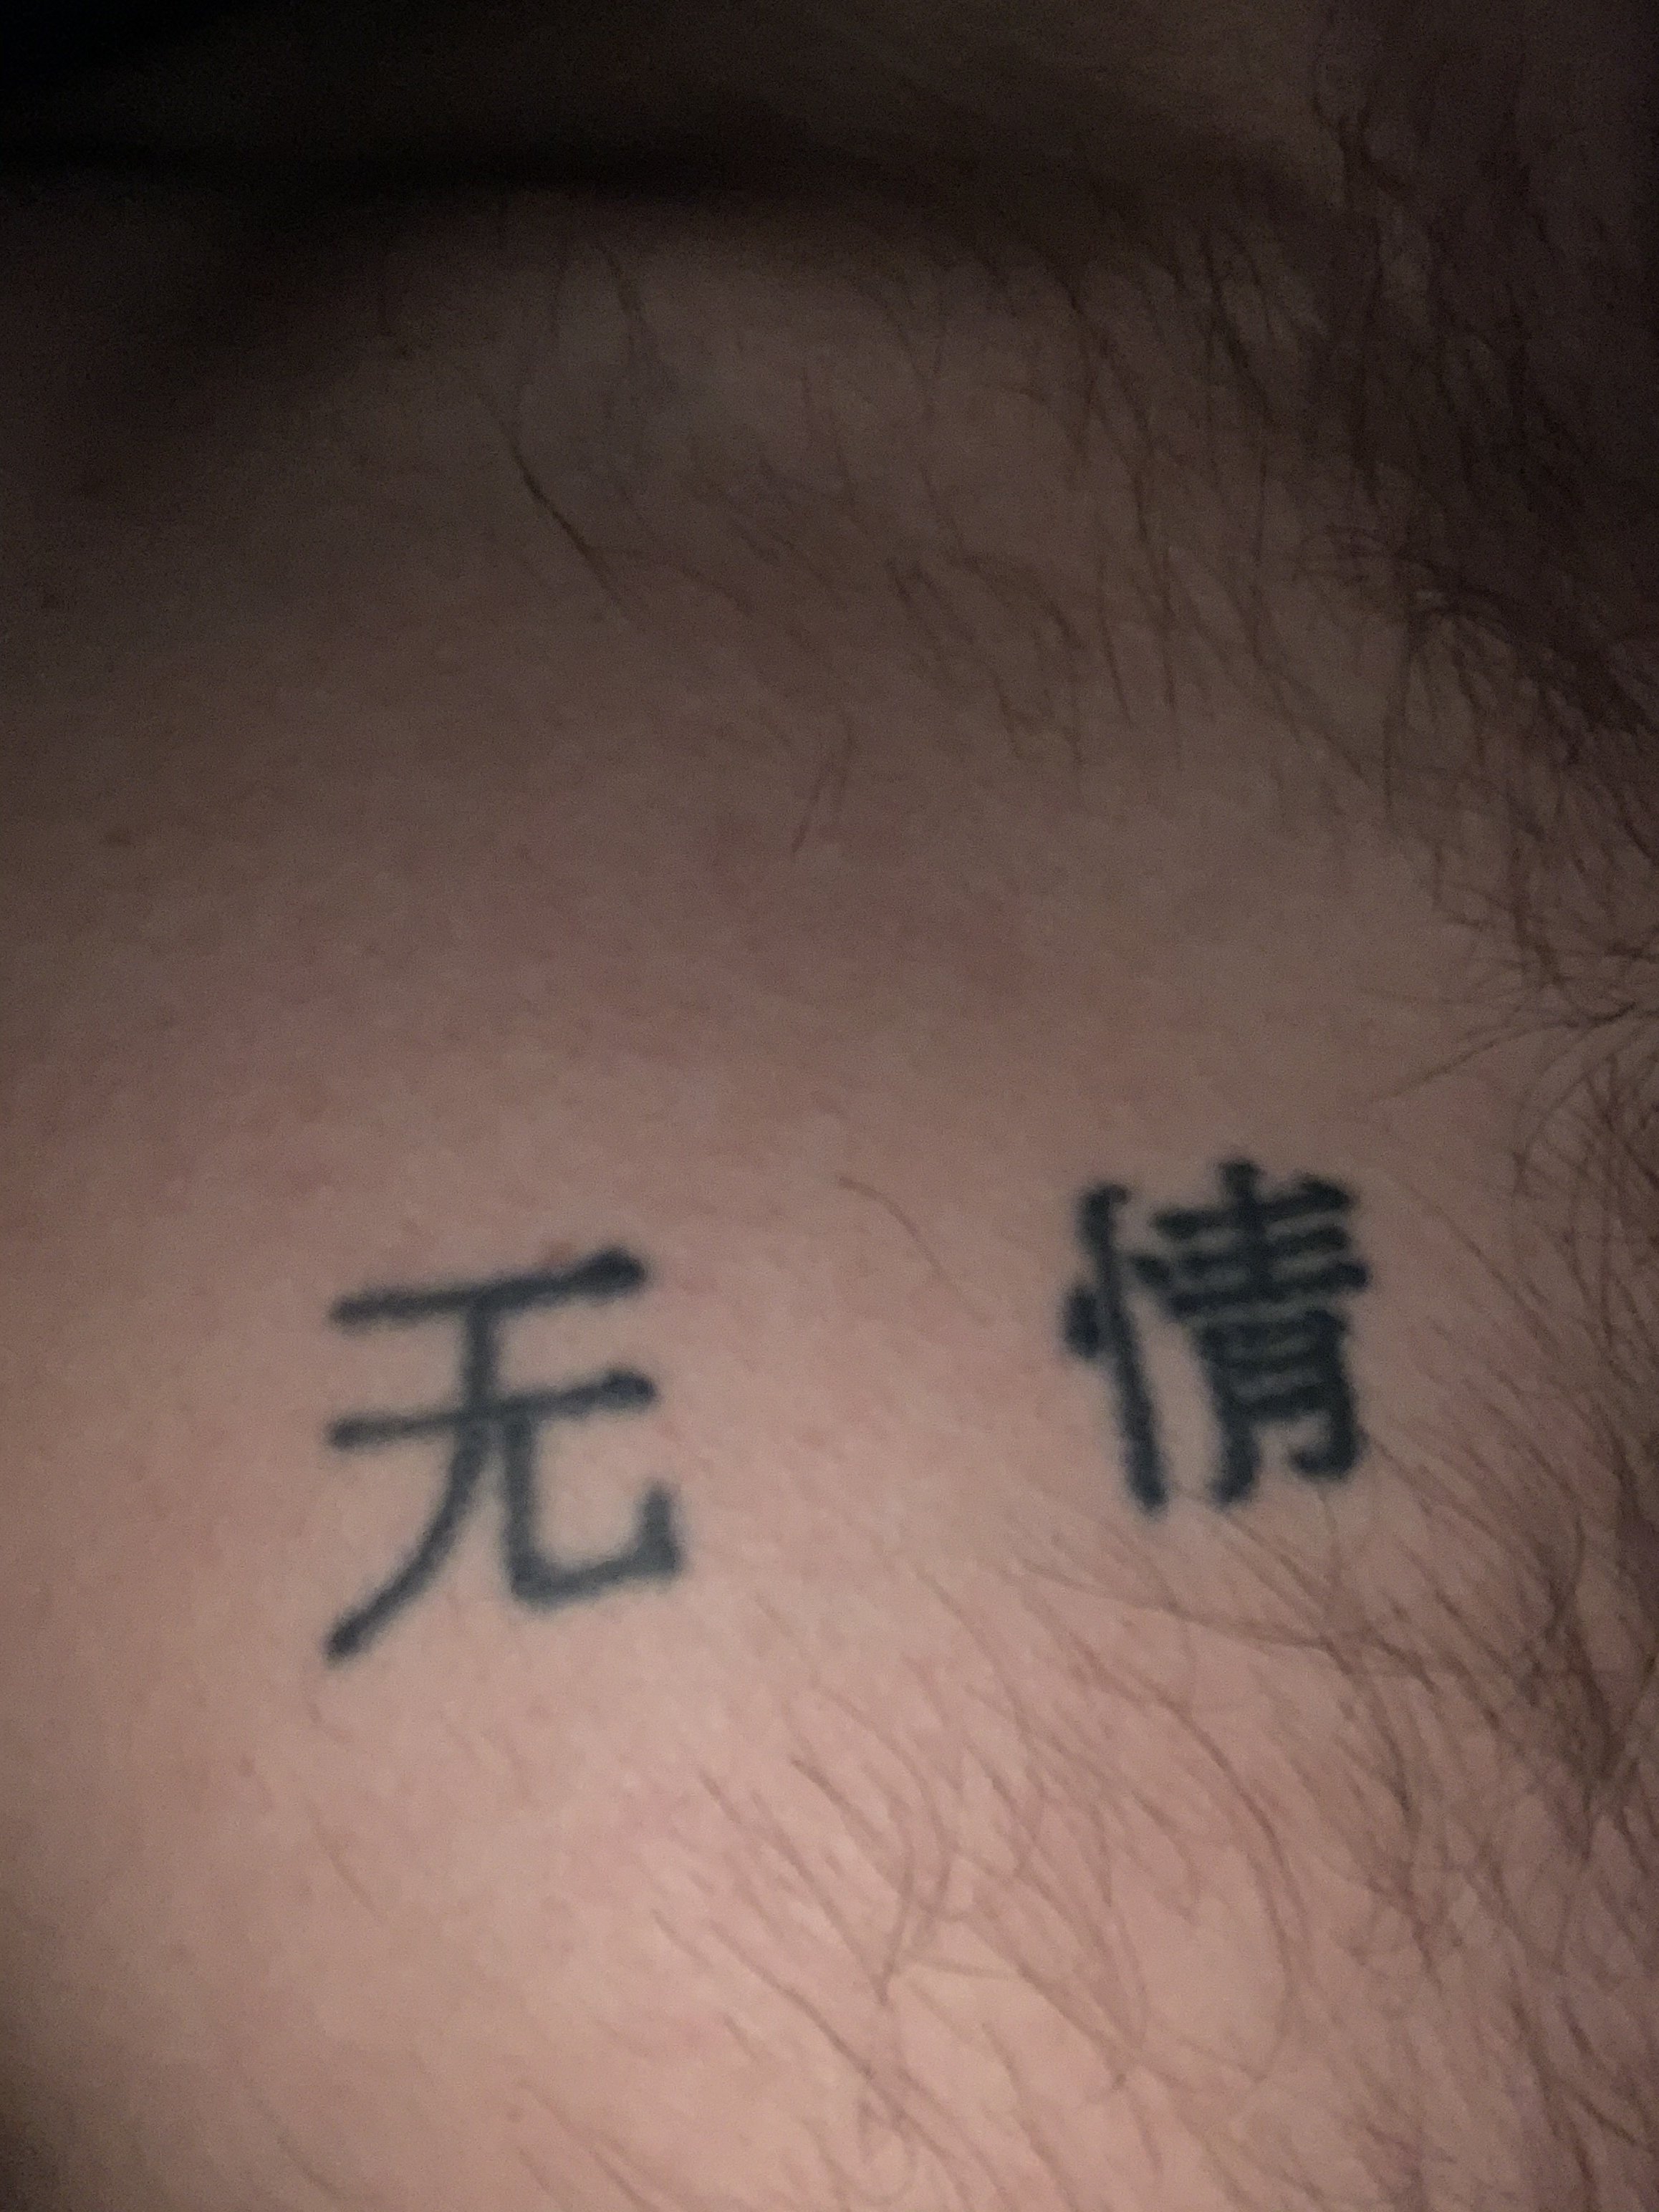 Does my tattoo mean relentless  Tattoos Names and Quick Translations   Chineseforumscom